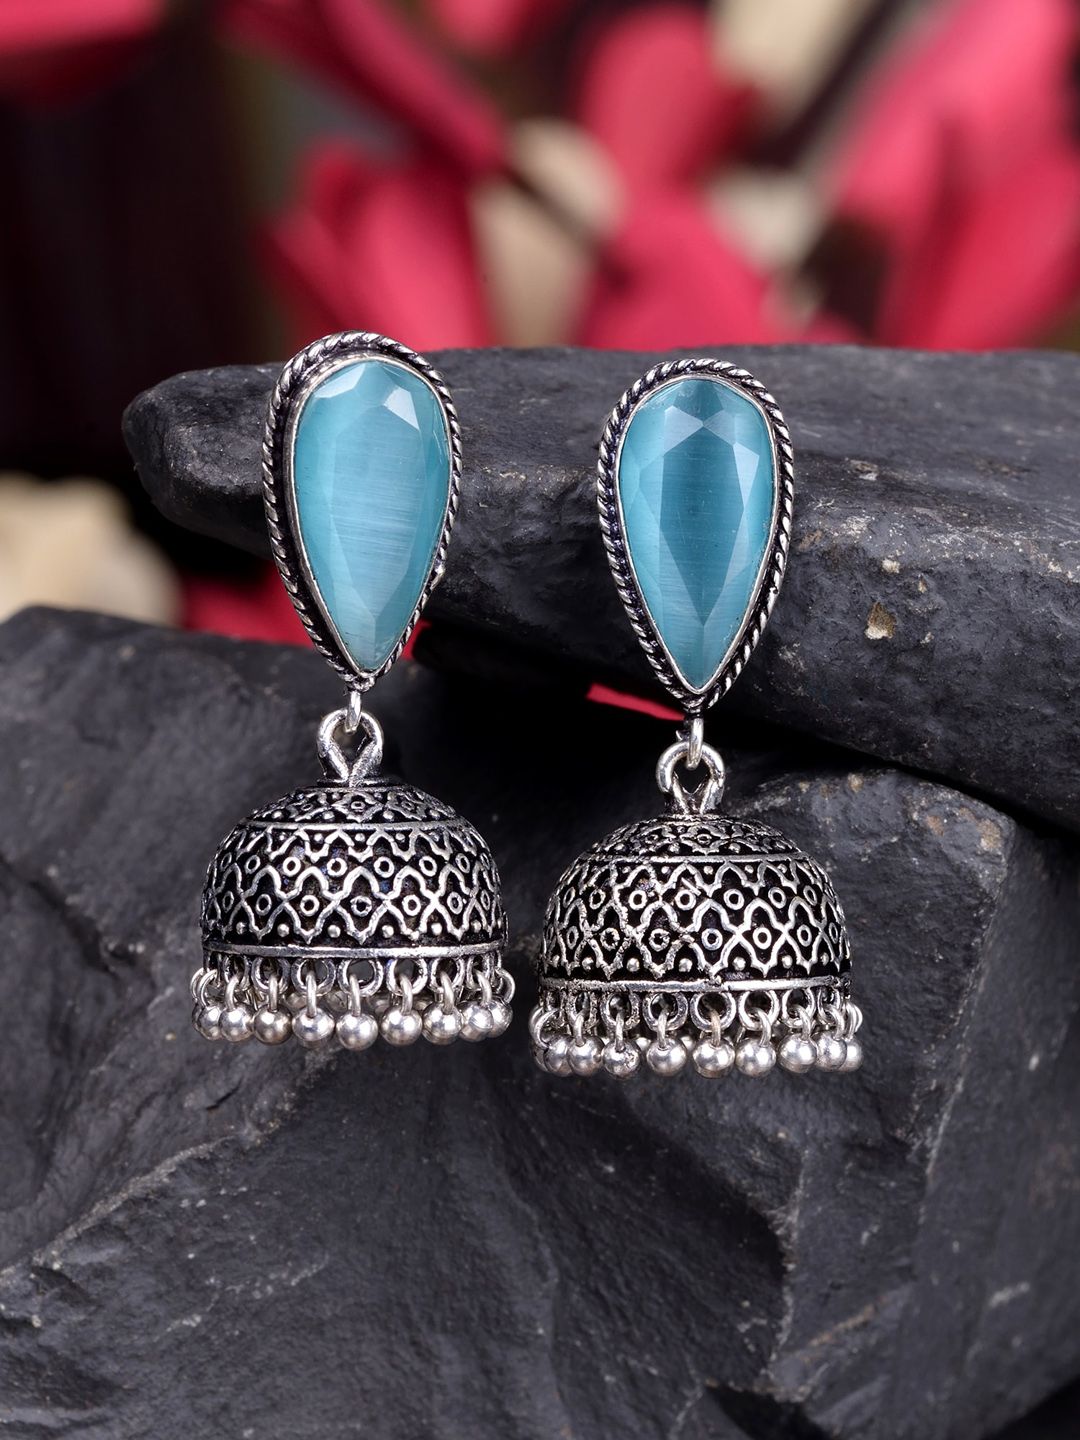 Saraf RS Jewellery Turquoise Blue Dome Shaped Jhumkas Earrings Price in India